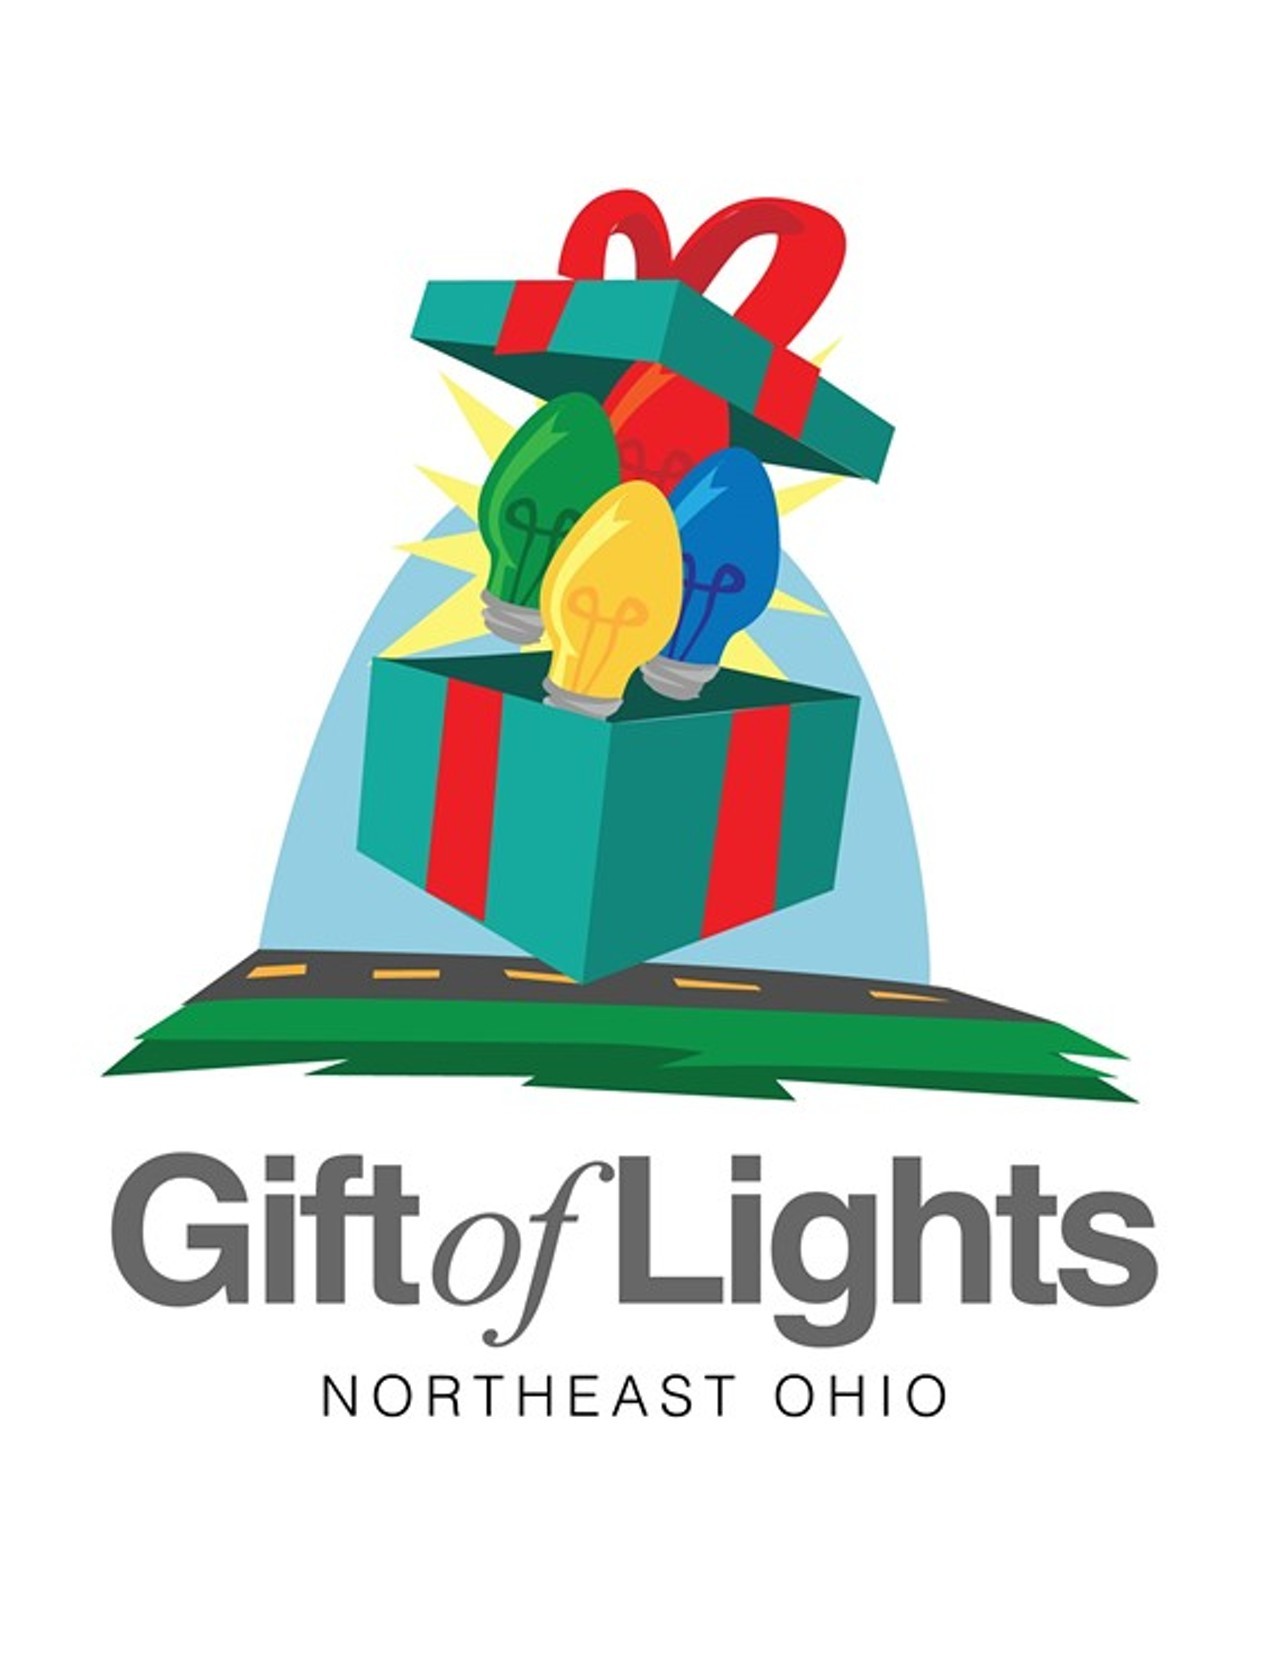 Gift of Lights 
When: Through Jan. 1, 2017, 5-10 p.m. 
Phone: 440-954-8703 
Email: tickets@funguysevents.com 
Price: $20 per standard vehicle 
https://giftoflights.com/northeast-ohio
Gift of Lights at Victory Park Ohio is a family-friendly 1+ Mile DRIVE-THRU holiday light display featuring 30+ incredible state-of-the-art static and animated displays including a 100+ foot light tunnel. (Photo courtesy Gift of Lights)